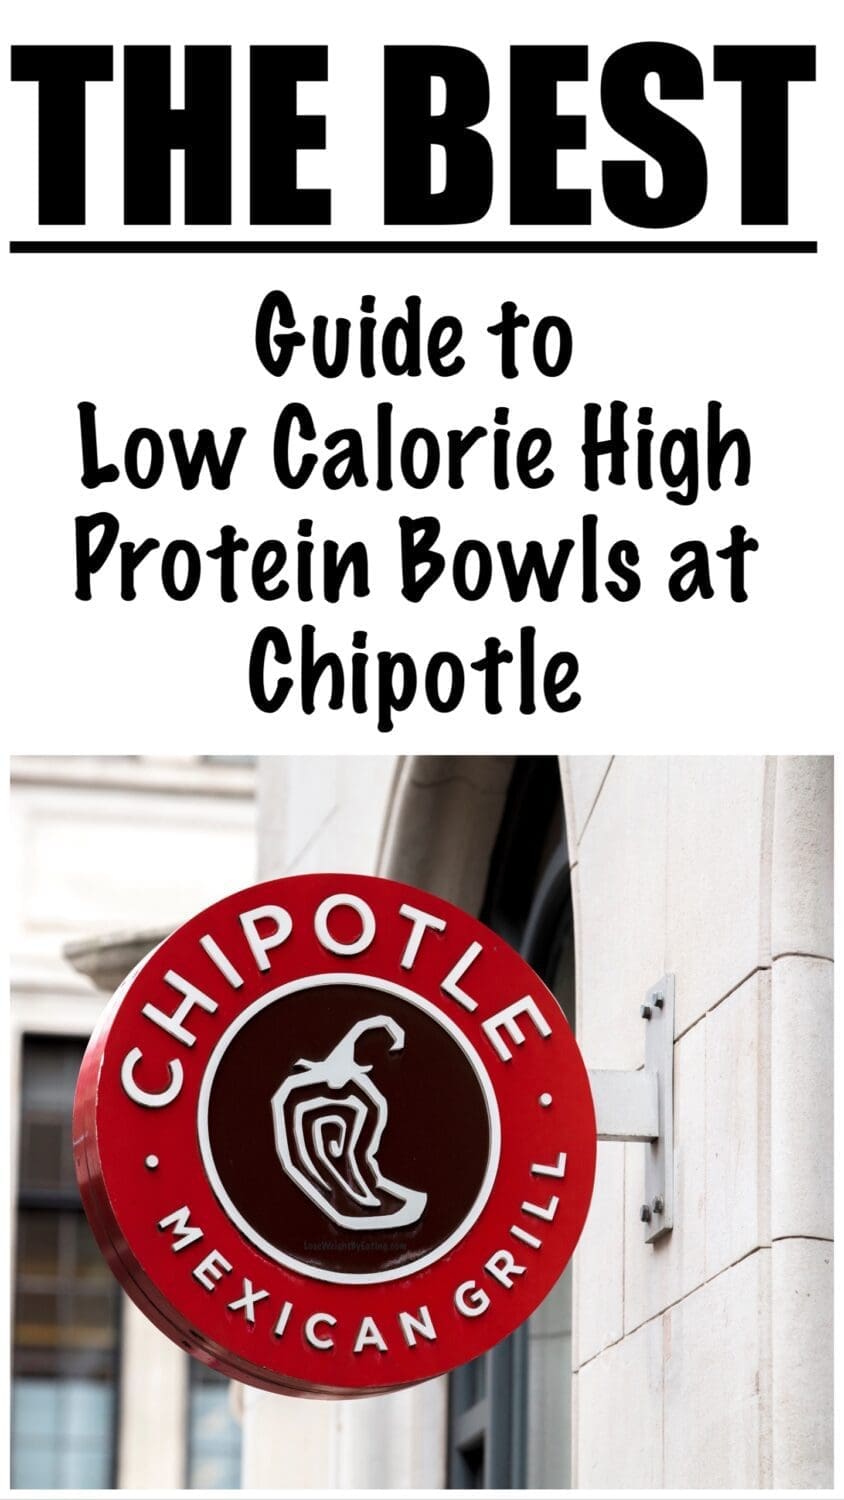 How to Build a Low Calorie High Protein Bowl at Chipotle